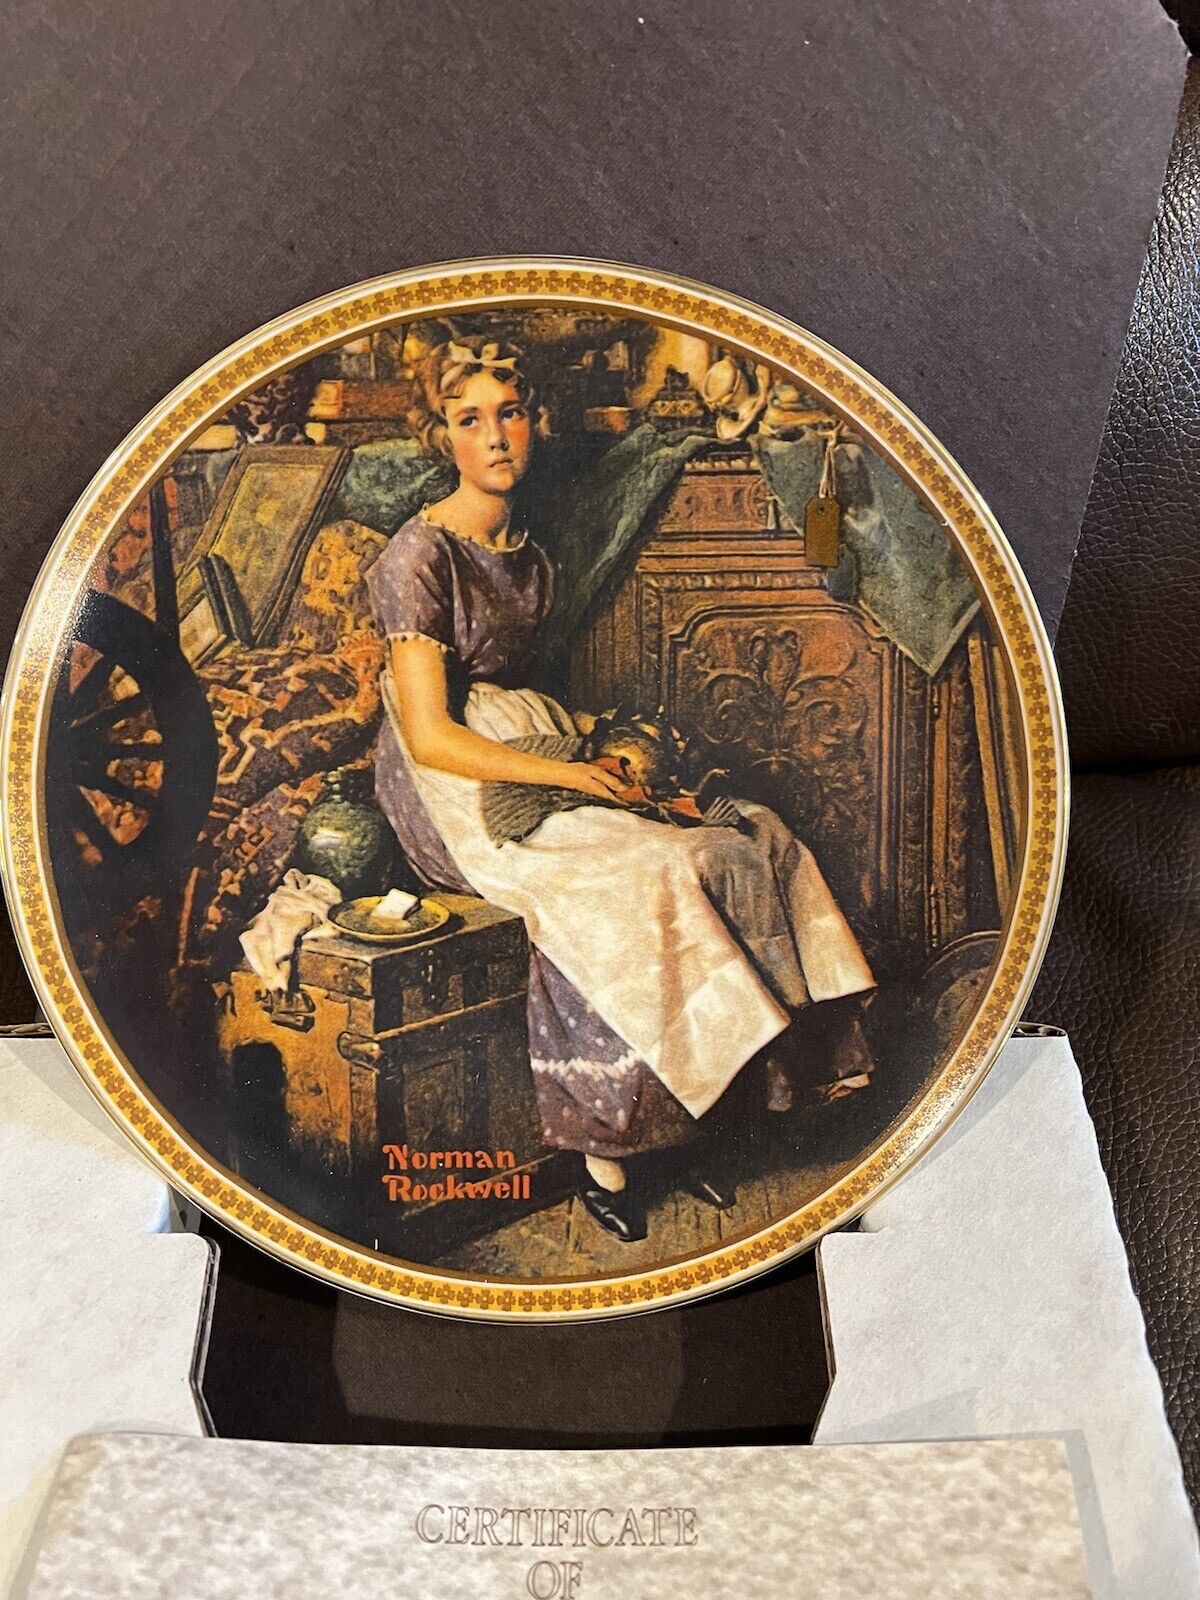 Knowles Norman Rockwell’s “Dreaming In The Attic” Collector Plate 8.5”